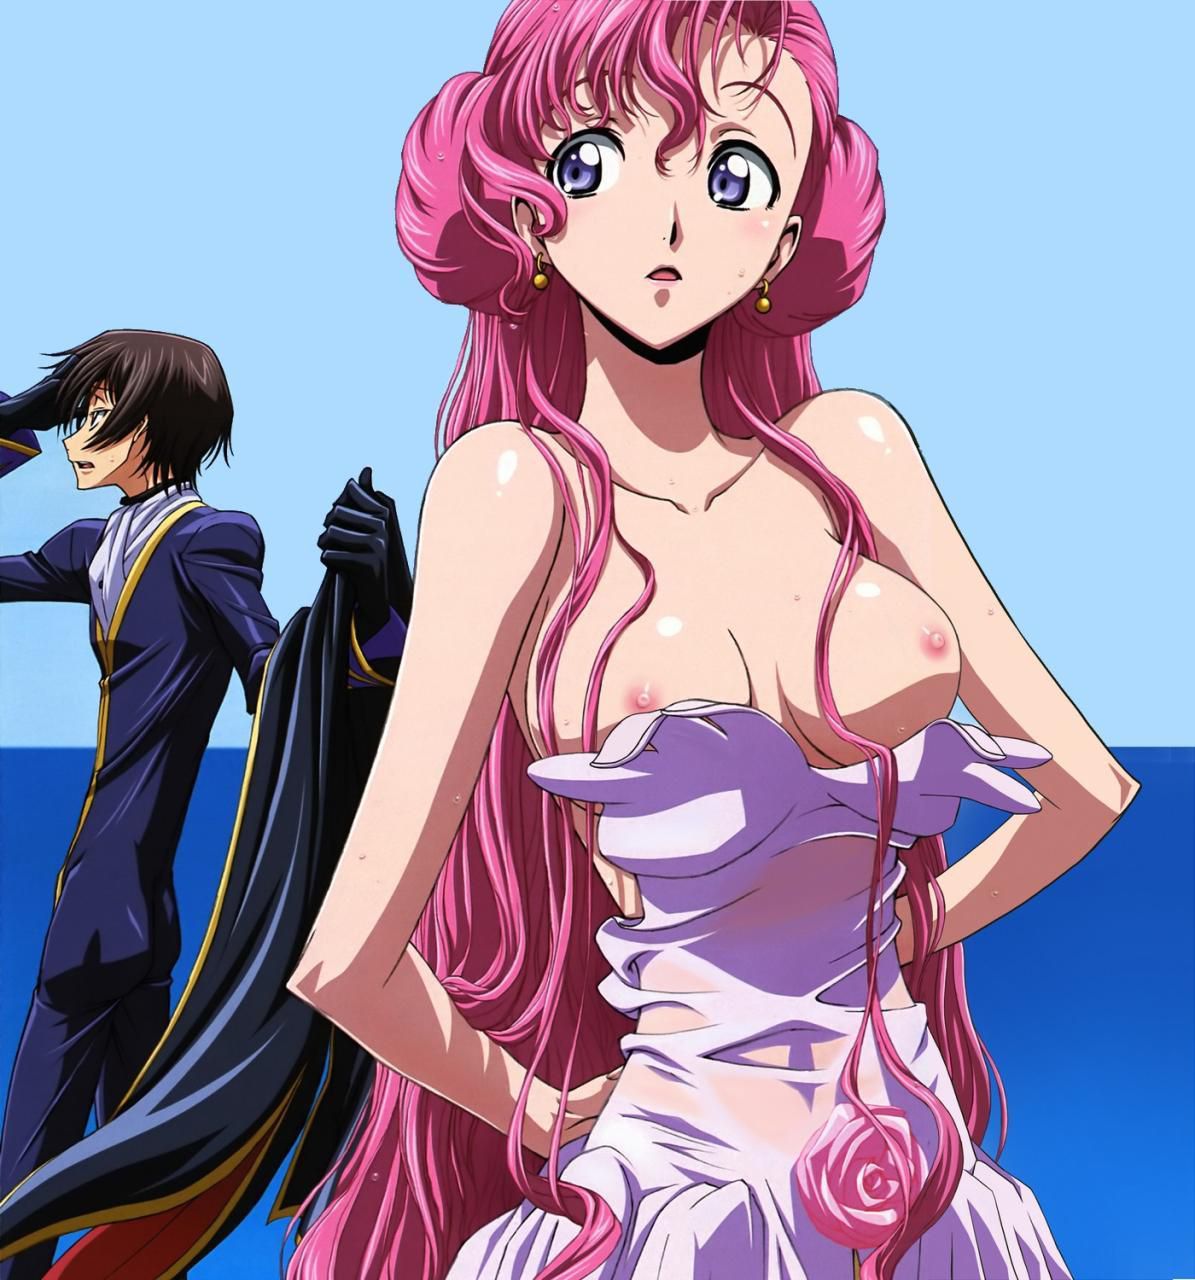 In Code Geass thoroughly you want to nukinuki 12